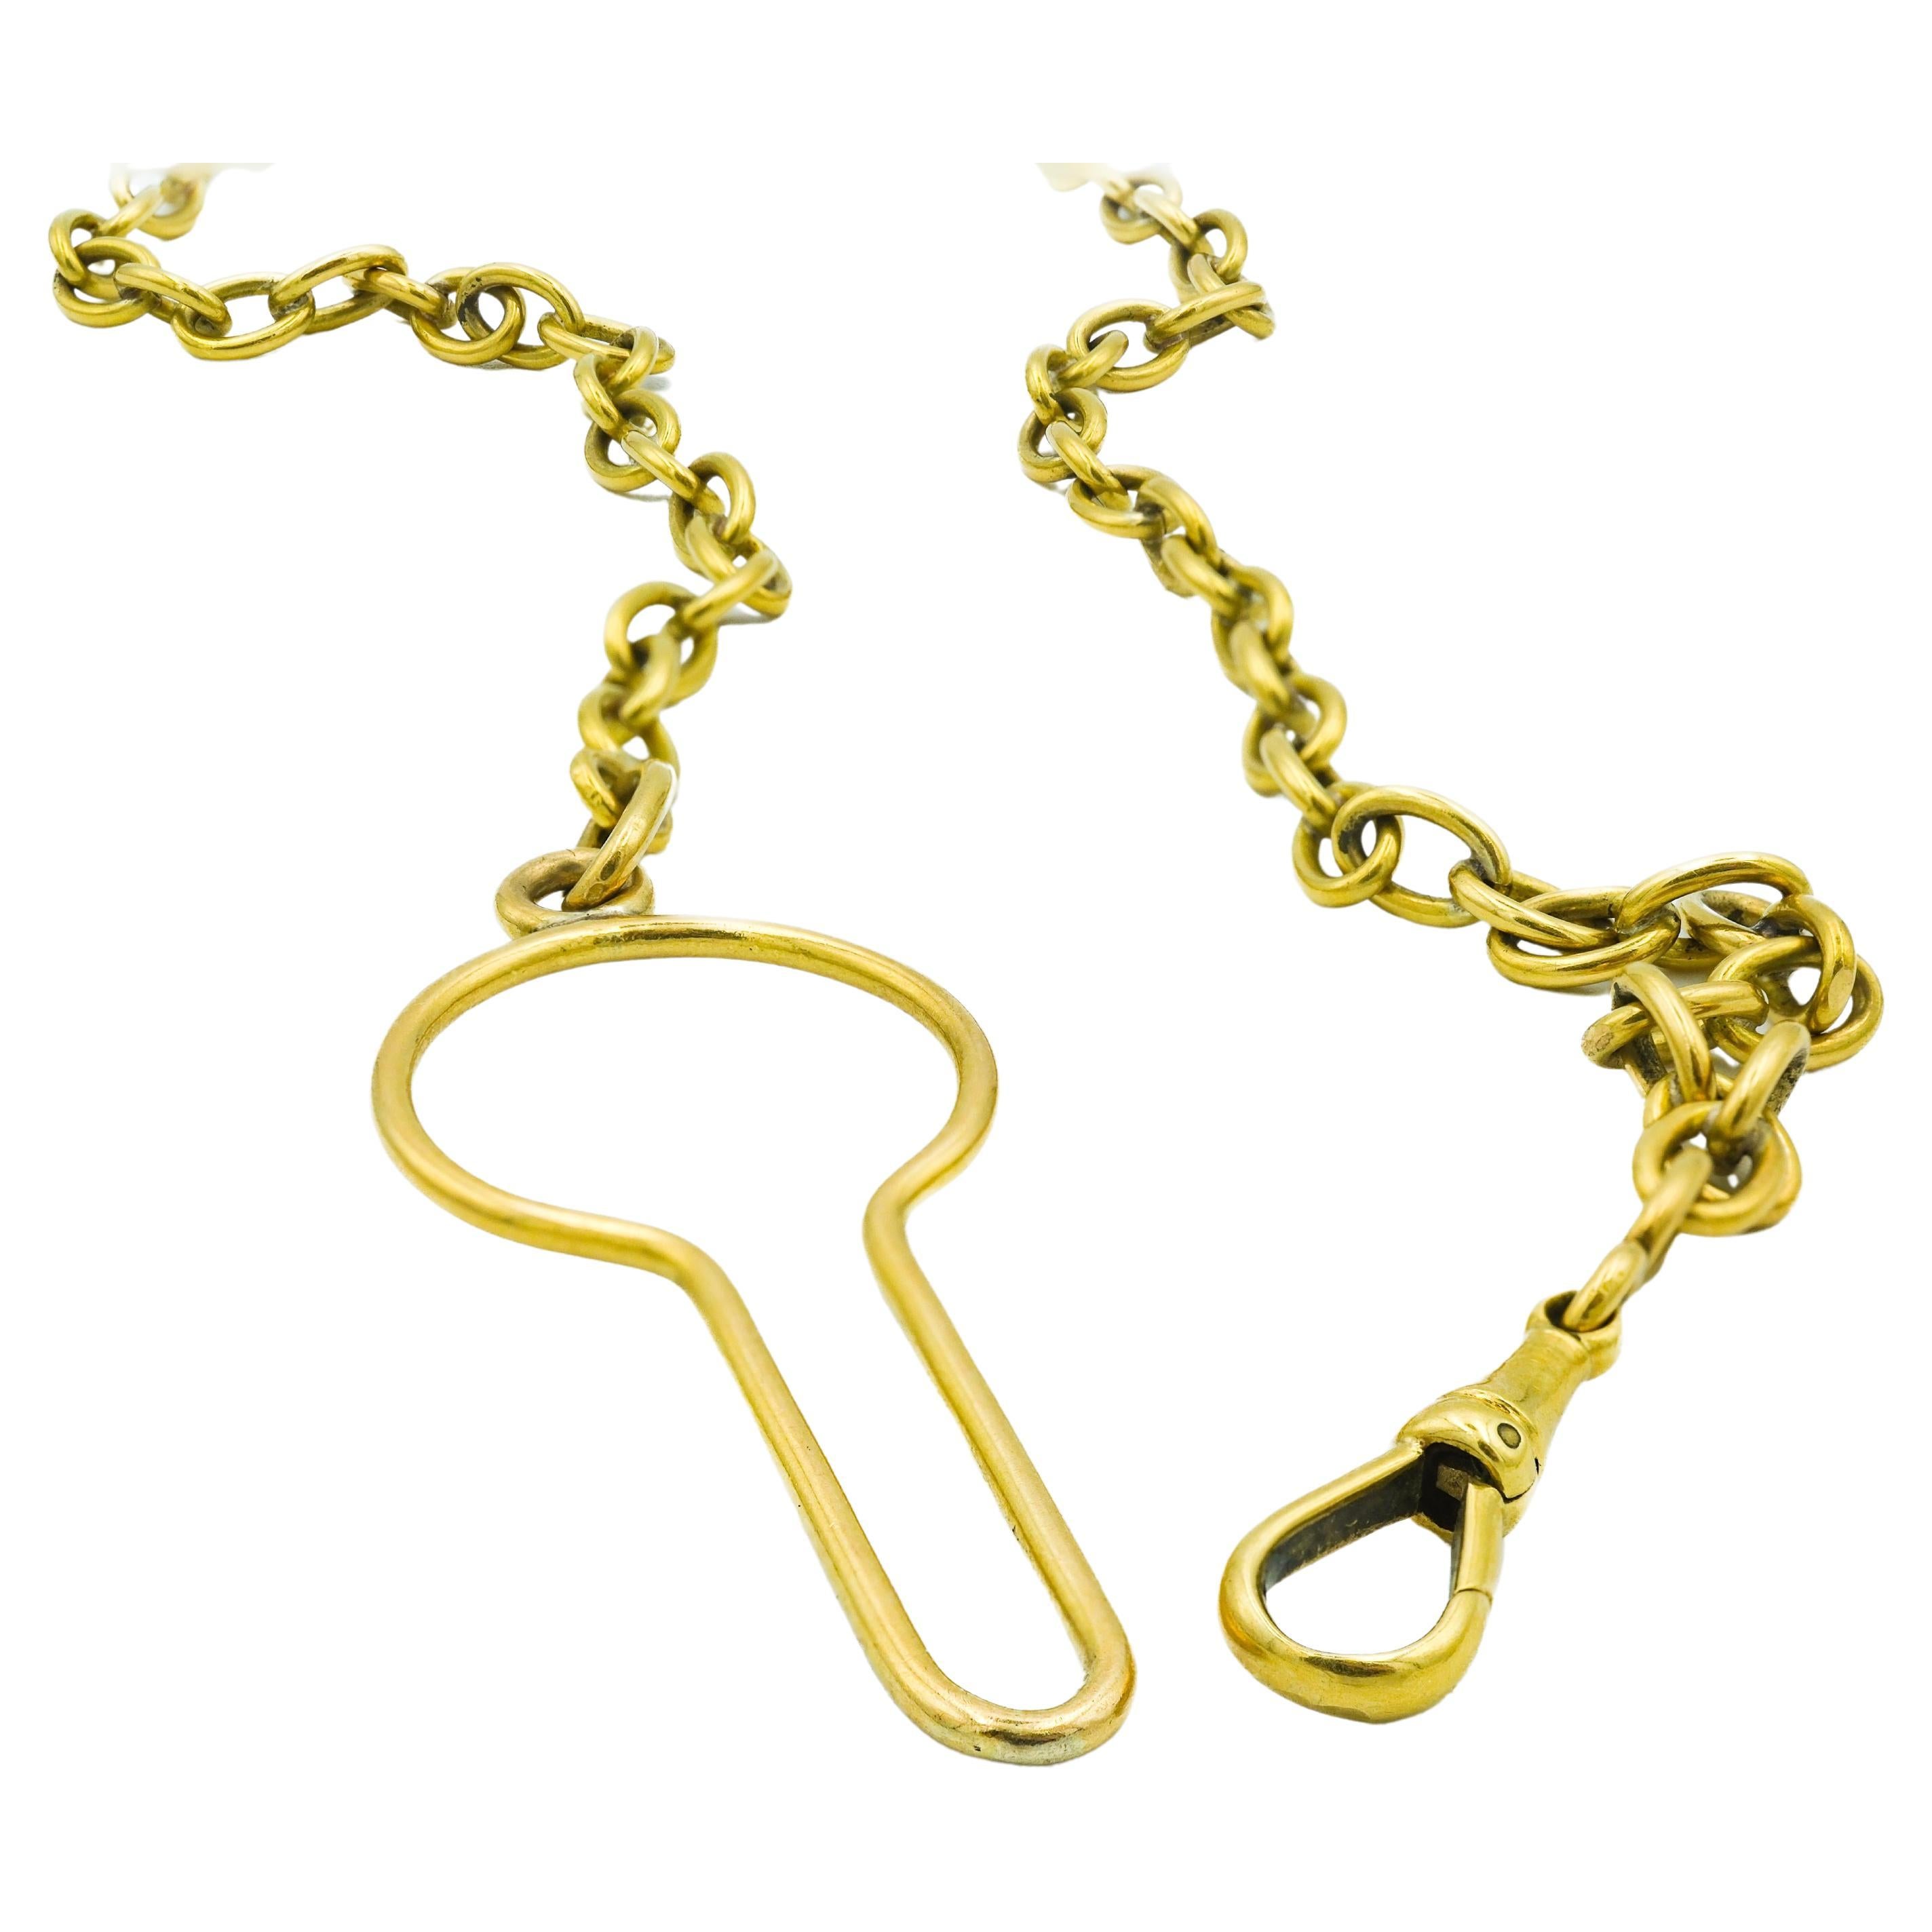 This 18 karat yellow gold chain exemplifies Victorian era jewelry design, characterized by its functionality and craftsmanship. The piece features a dog clasp, commonly used in the period to secure a gentleman's pocket watch. Its distinctive